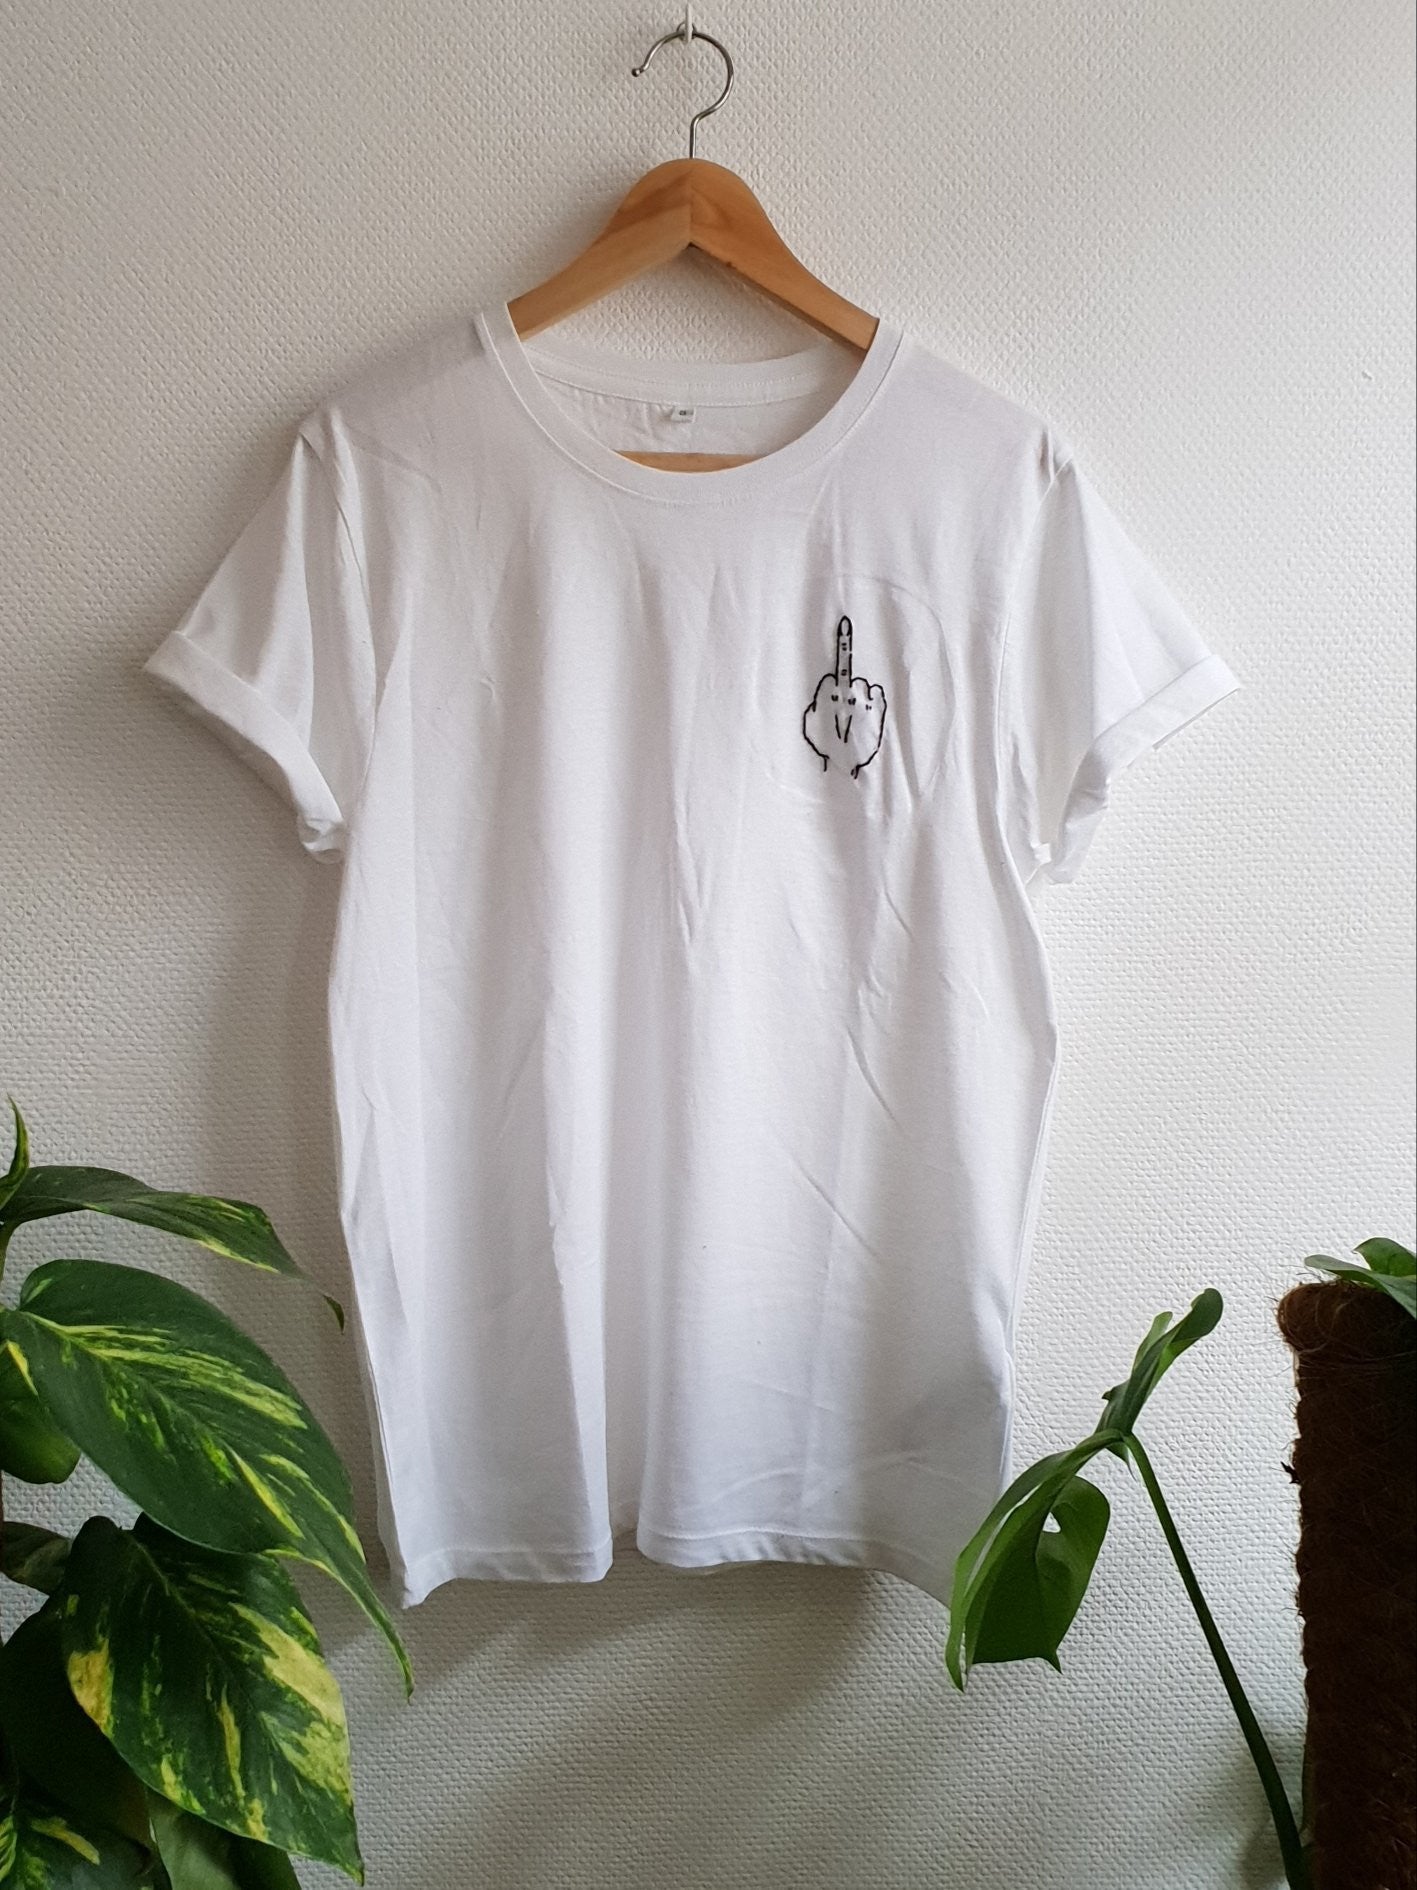 Hand Embroidered Middle Finger Shirt -  Spacy Shirts